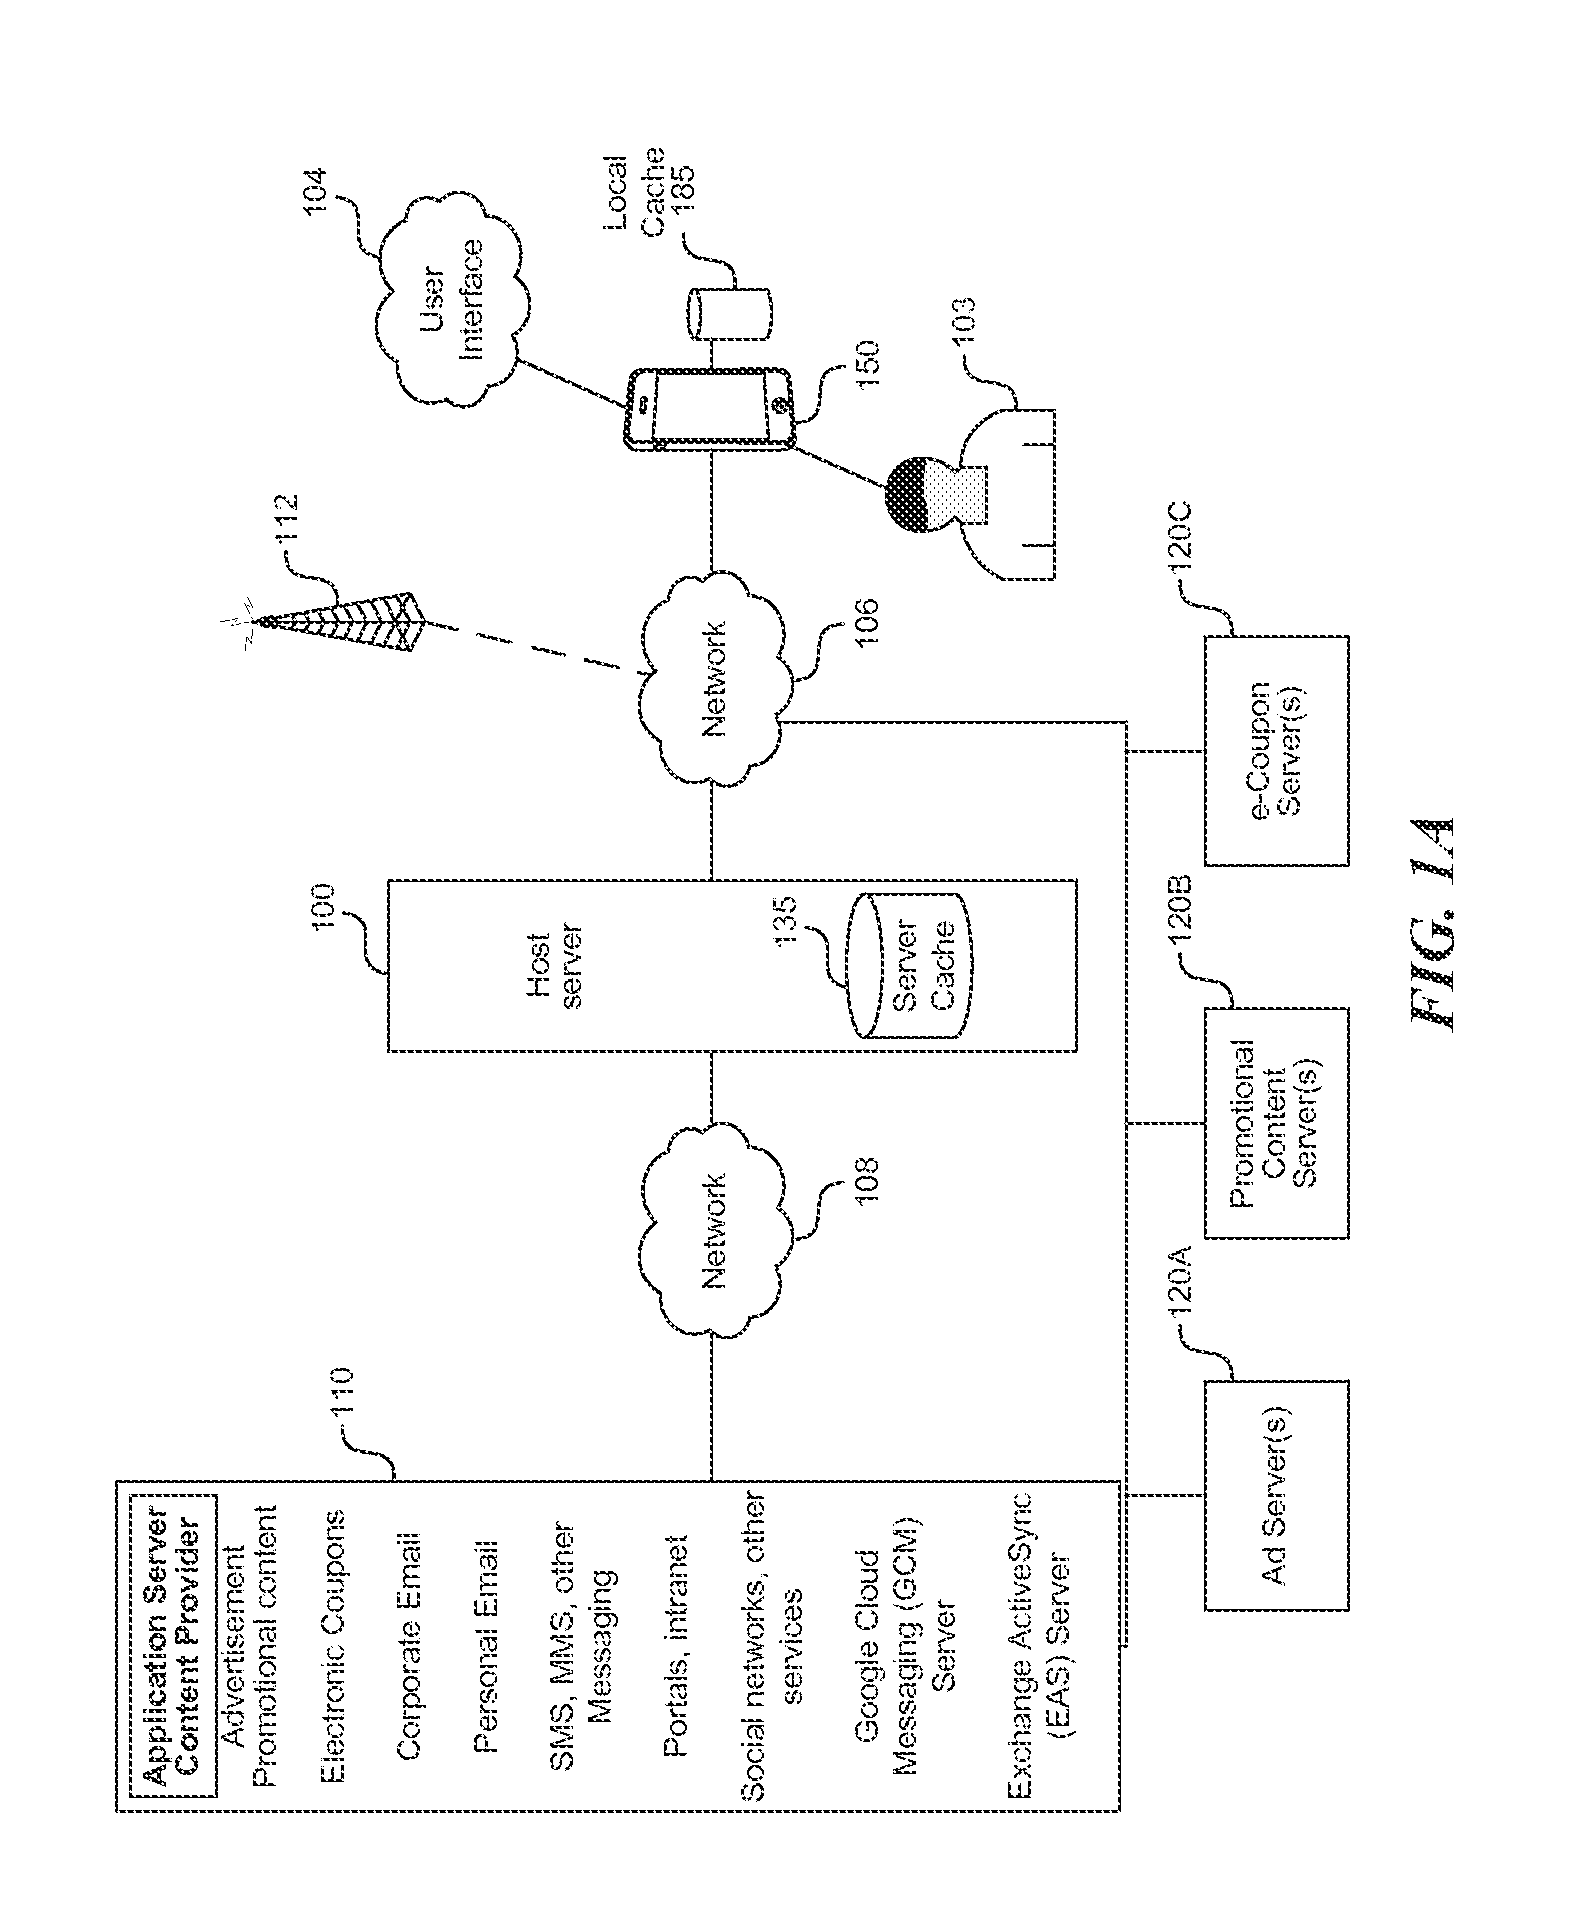 Policy management for signaling optimization in a wireless network for traffic utilizing proprietary and non-proprietary protocols